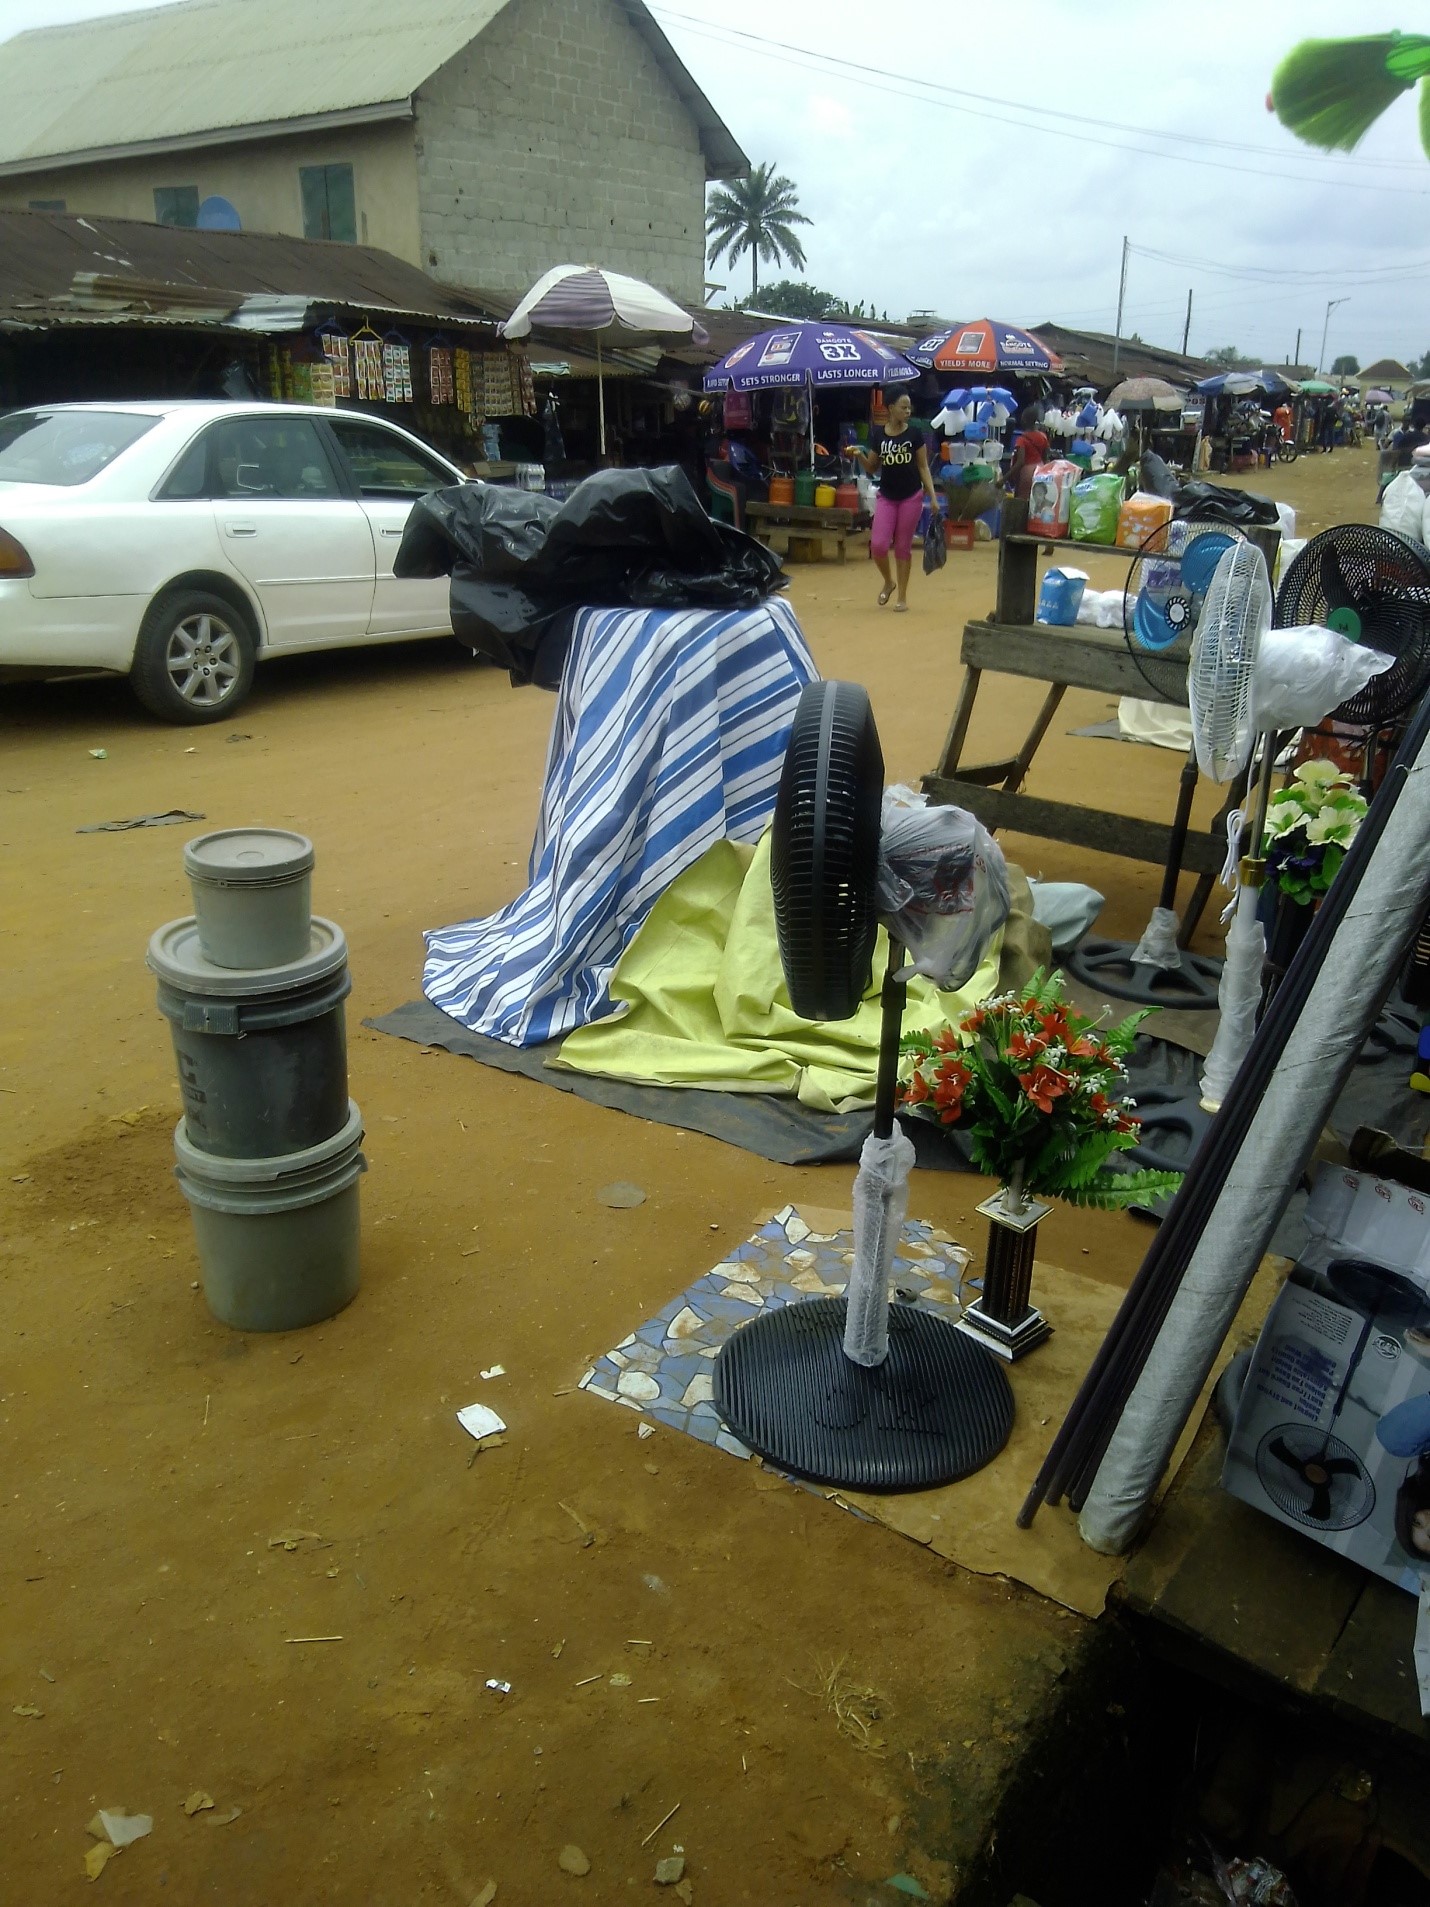 Petty business operators managed to set up at Ogbaku, Owerri on August 29